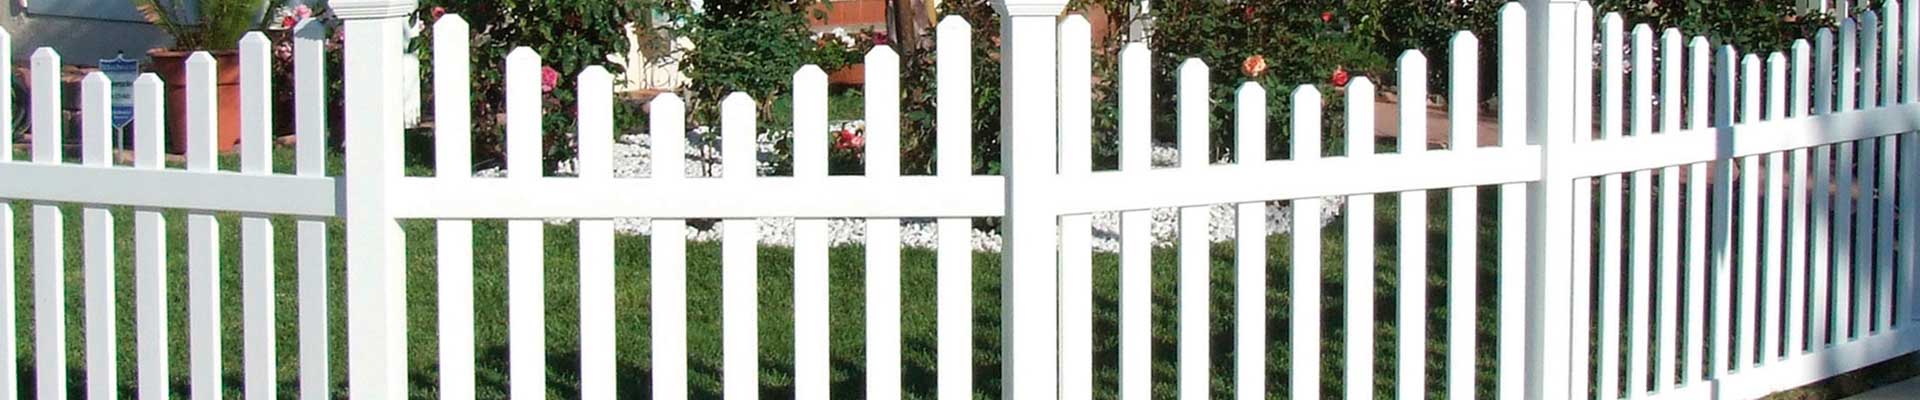 Installing a Vinyl Fence: A Foolproof Guide